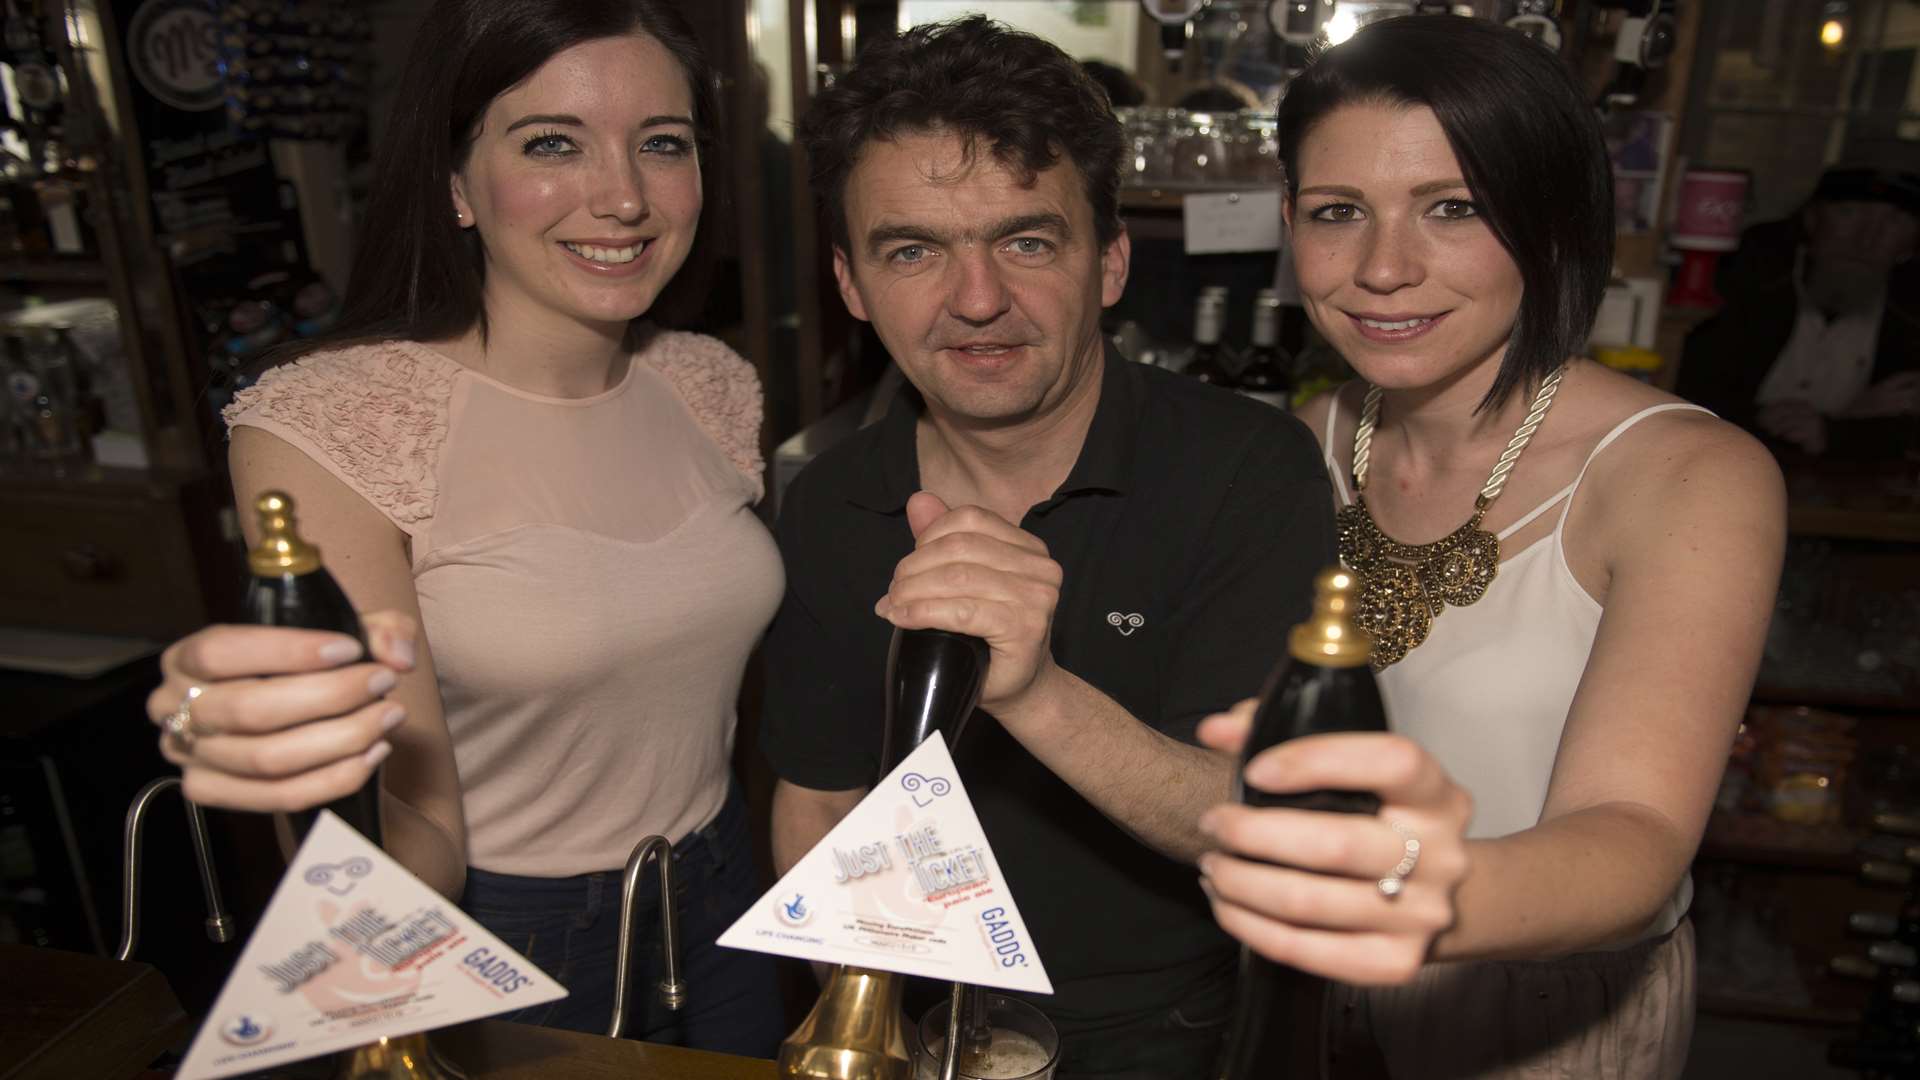 Past EuroMillions winners Becky Witt (left) and Carly Wiggett (right) with Ramsgate brewer Eddie Gadd in the Montefiore Arms.